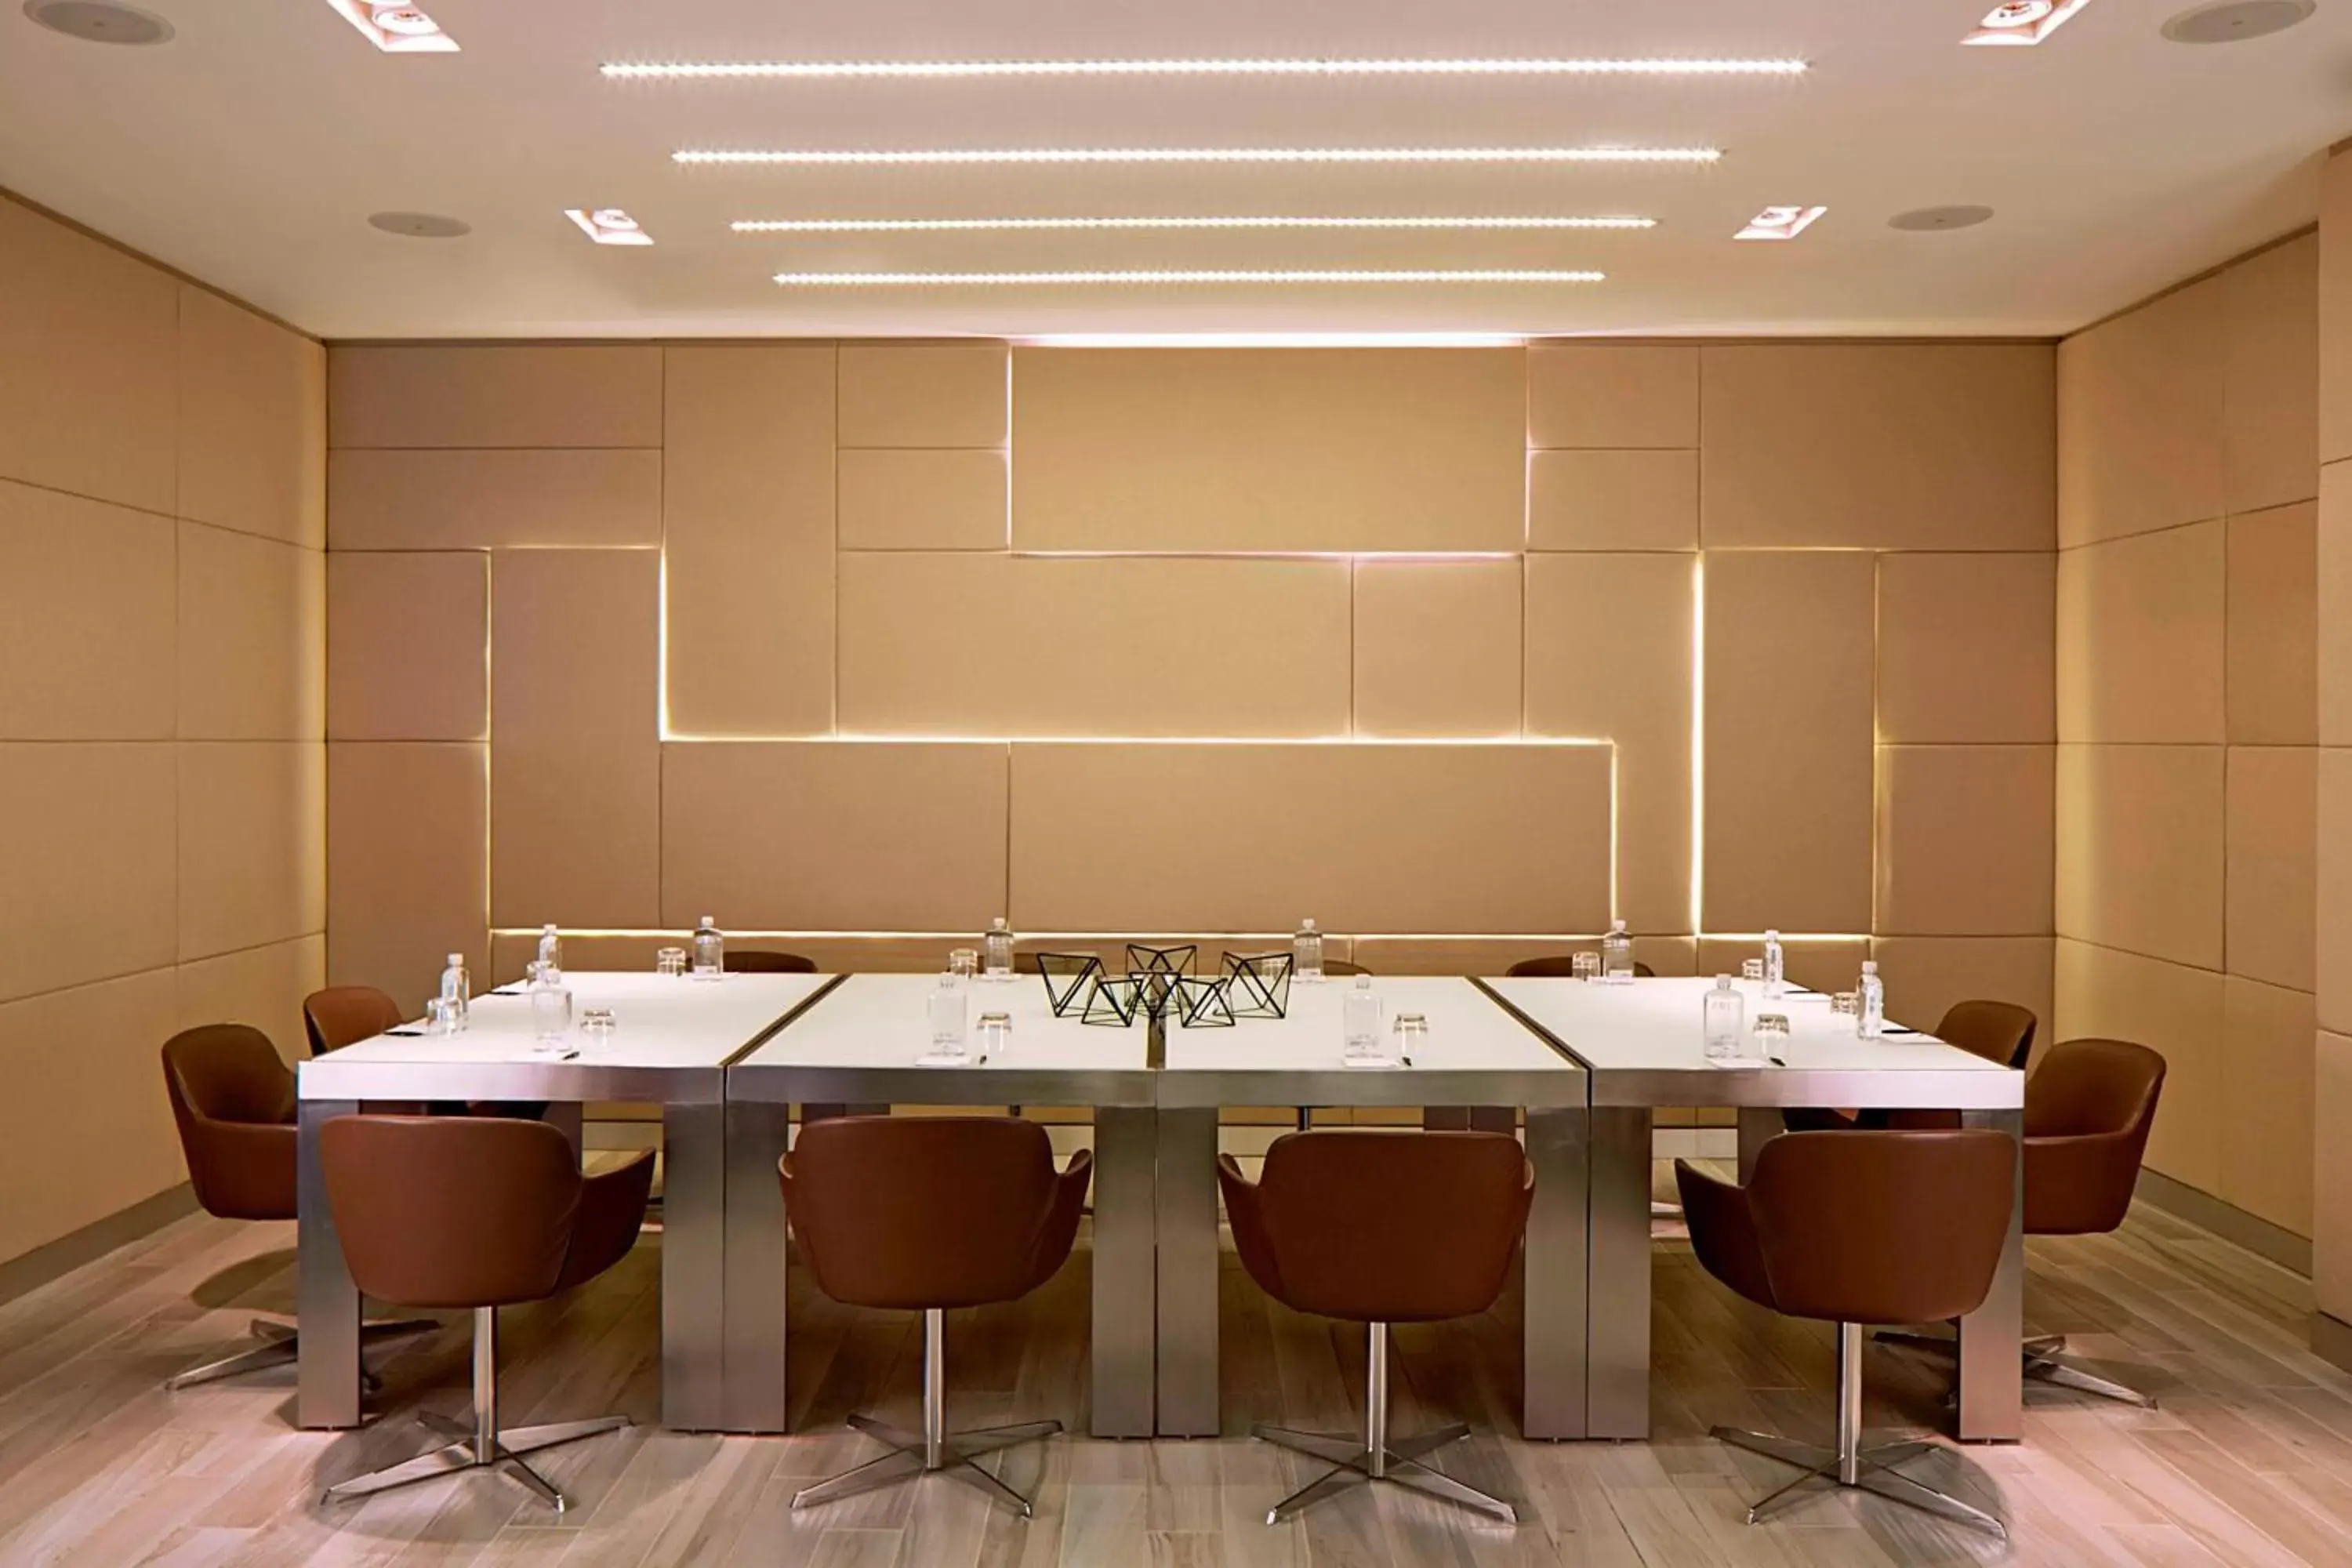 Meeting/conference room in AC Hotel by Marriott Miami Beach